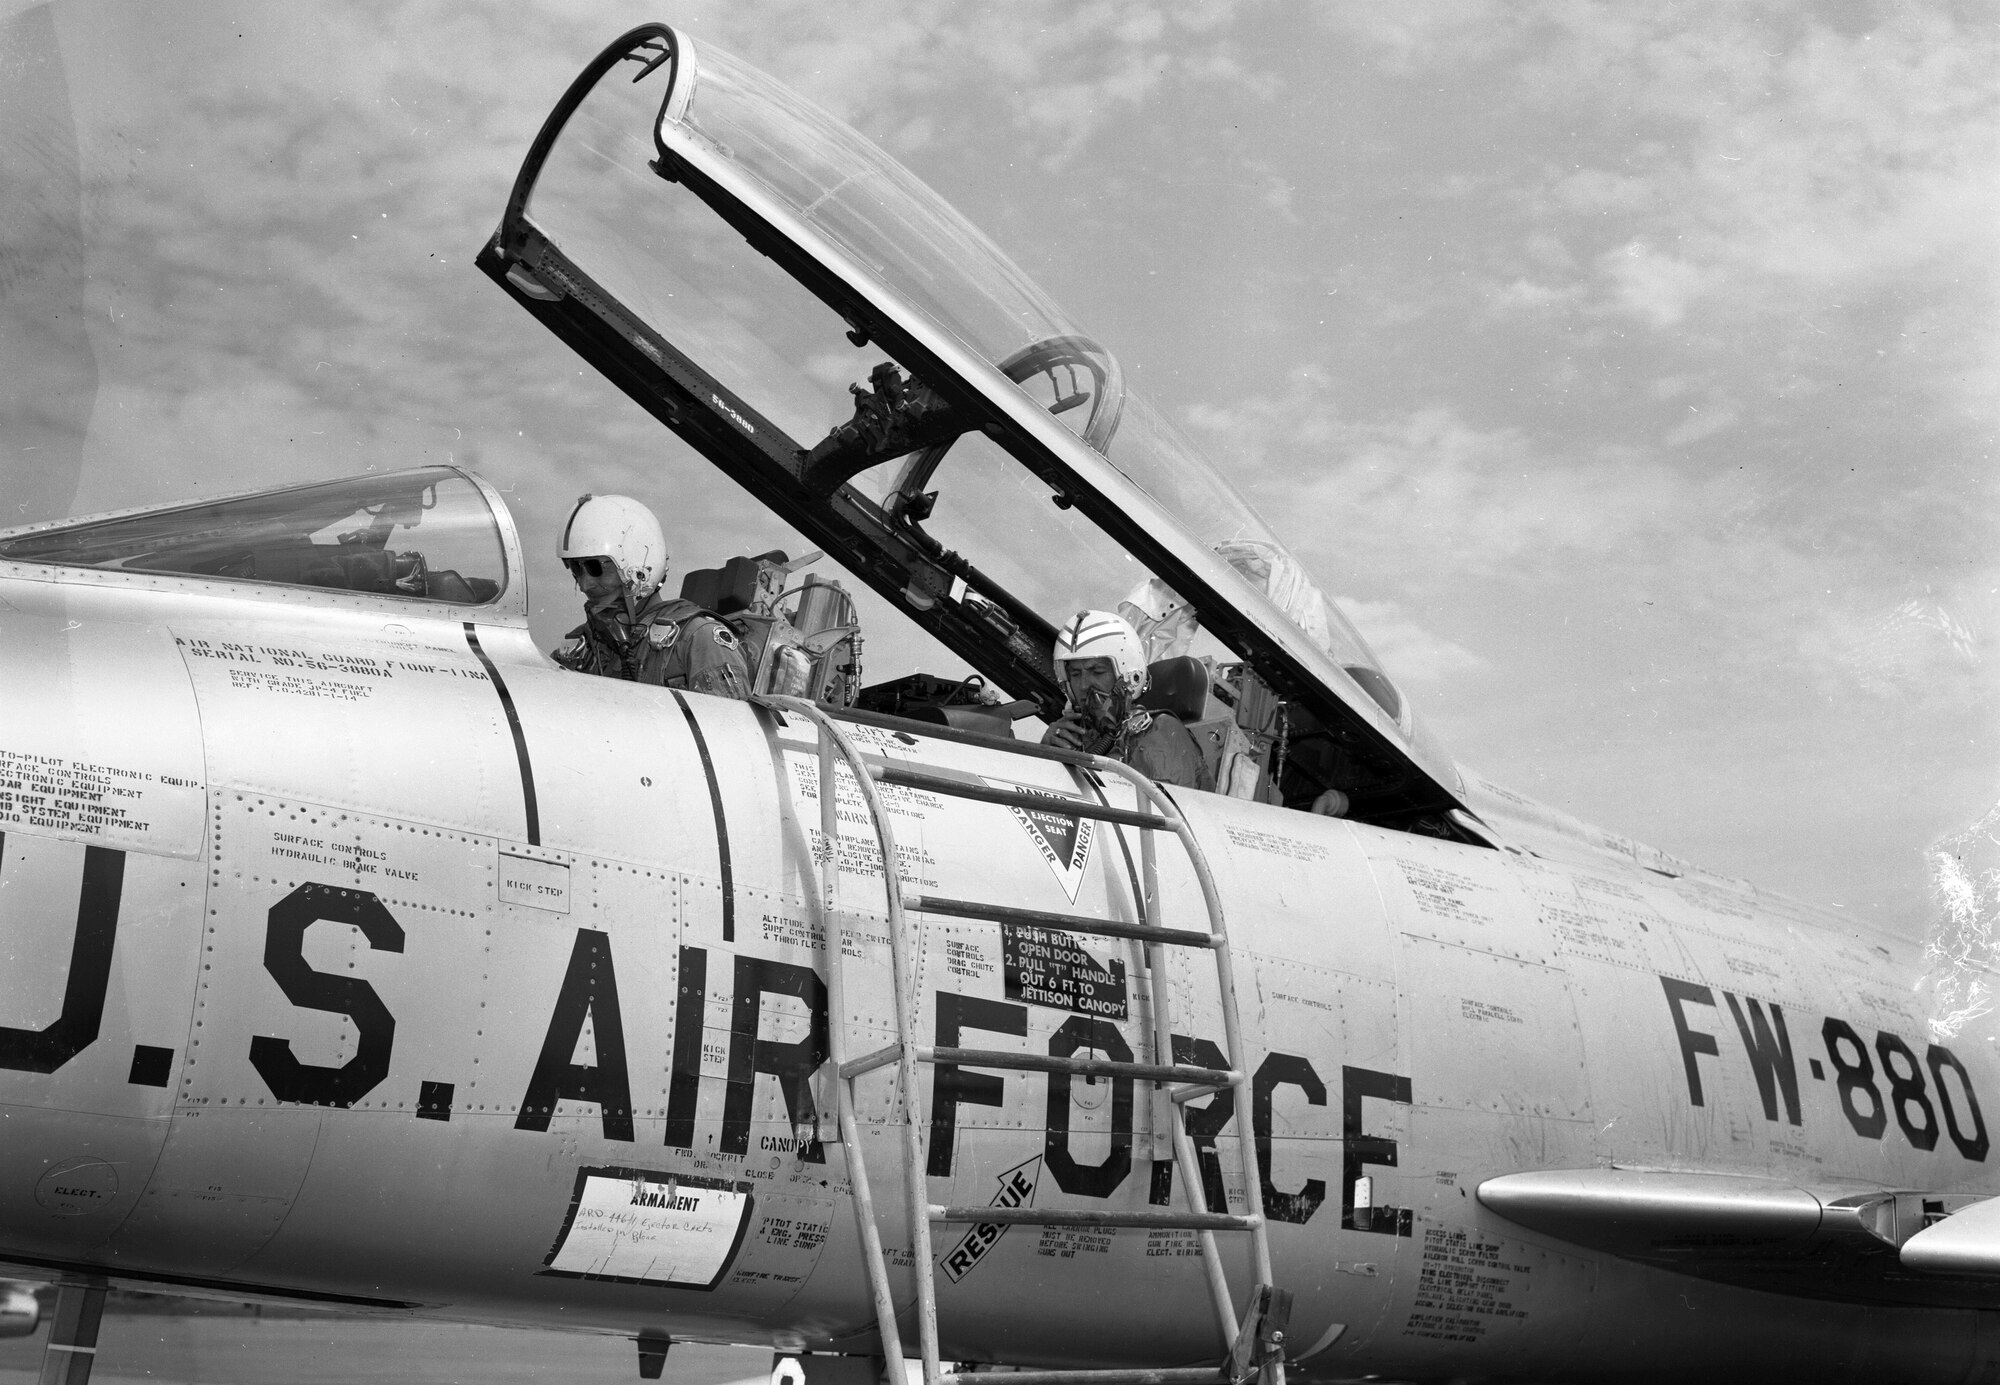 Lt. Col. Warren G. Nelson, 185th Tactical Fighter Group returns from a flight in an F-100F while Iowa Governor Harold Hughes rides in the back seat at the Volk Filed Combat Readiness Training Center in Wisconsin on July 22, 1966. Hughes was treated to a backseat ride in the two seat training model of the F-100 while visiting the unit during their annual summer training. The F-100, tail number 880, was assigned to the Iowa National Guard’s 185th Tactical Fighter Group in Sioux City, Iowa.
U.S. Air National Guard Photo by Airman 1st Class Dwain Volwieler 185th TFG Photographer